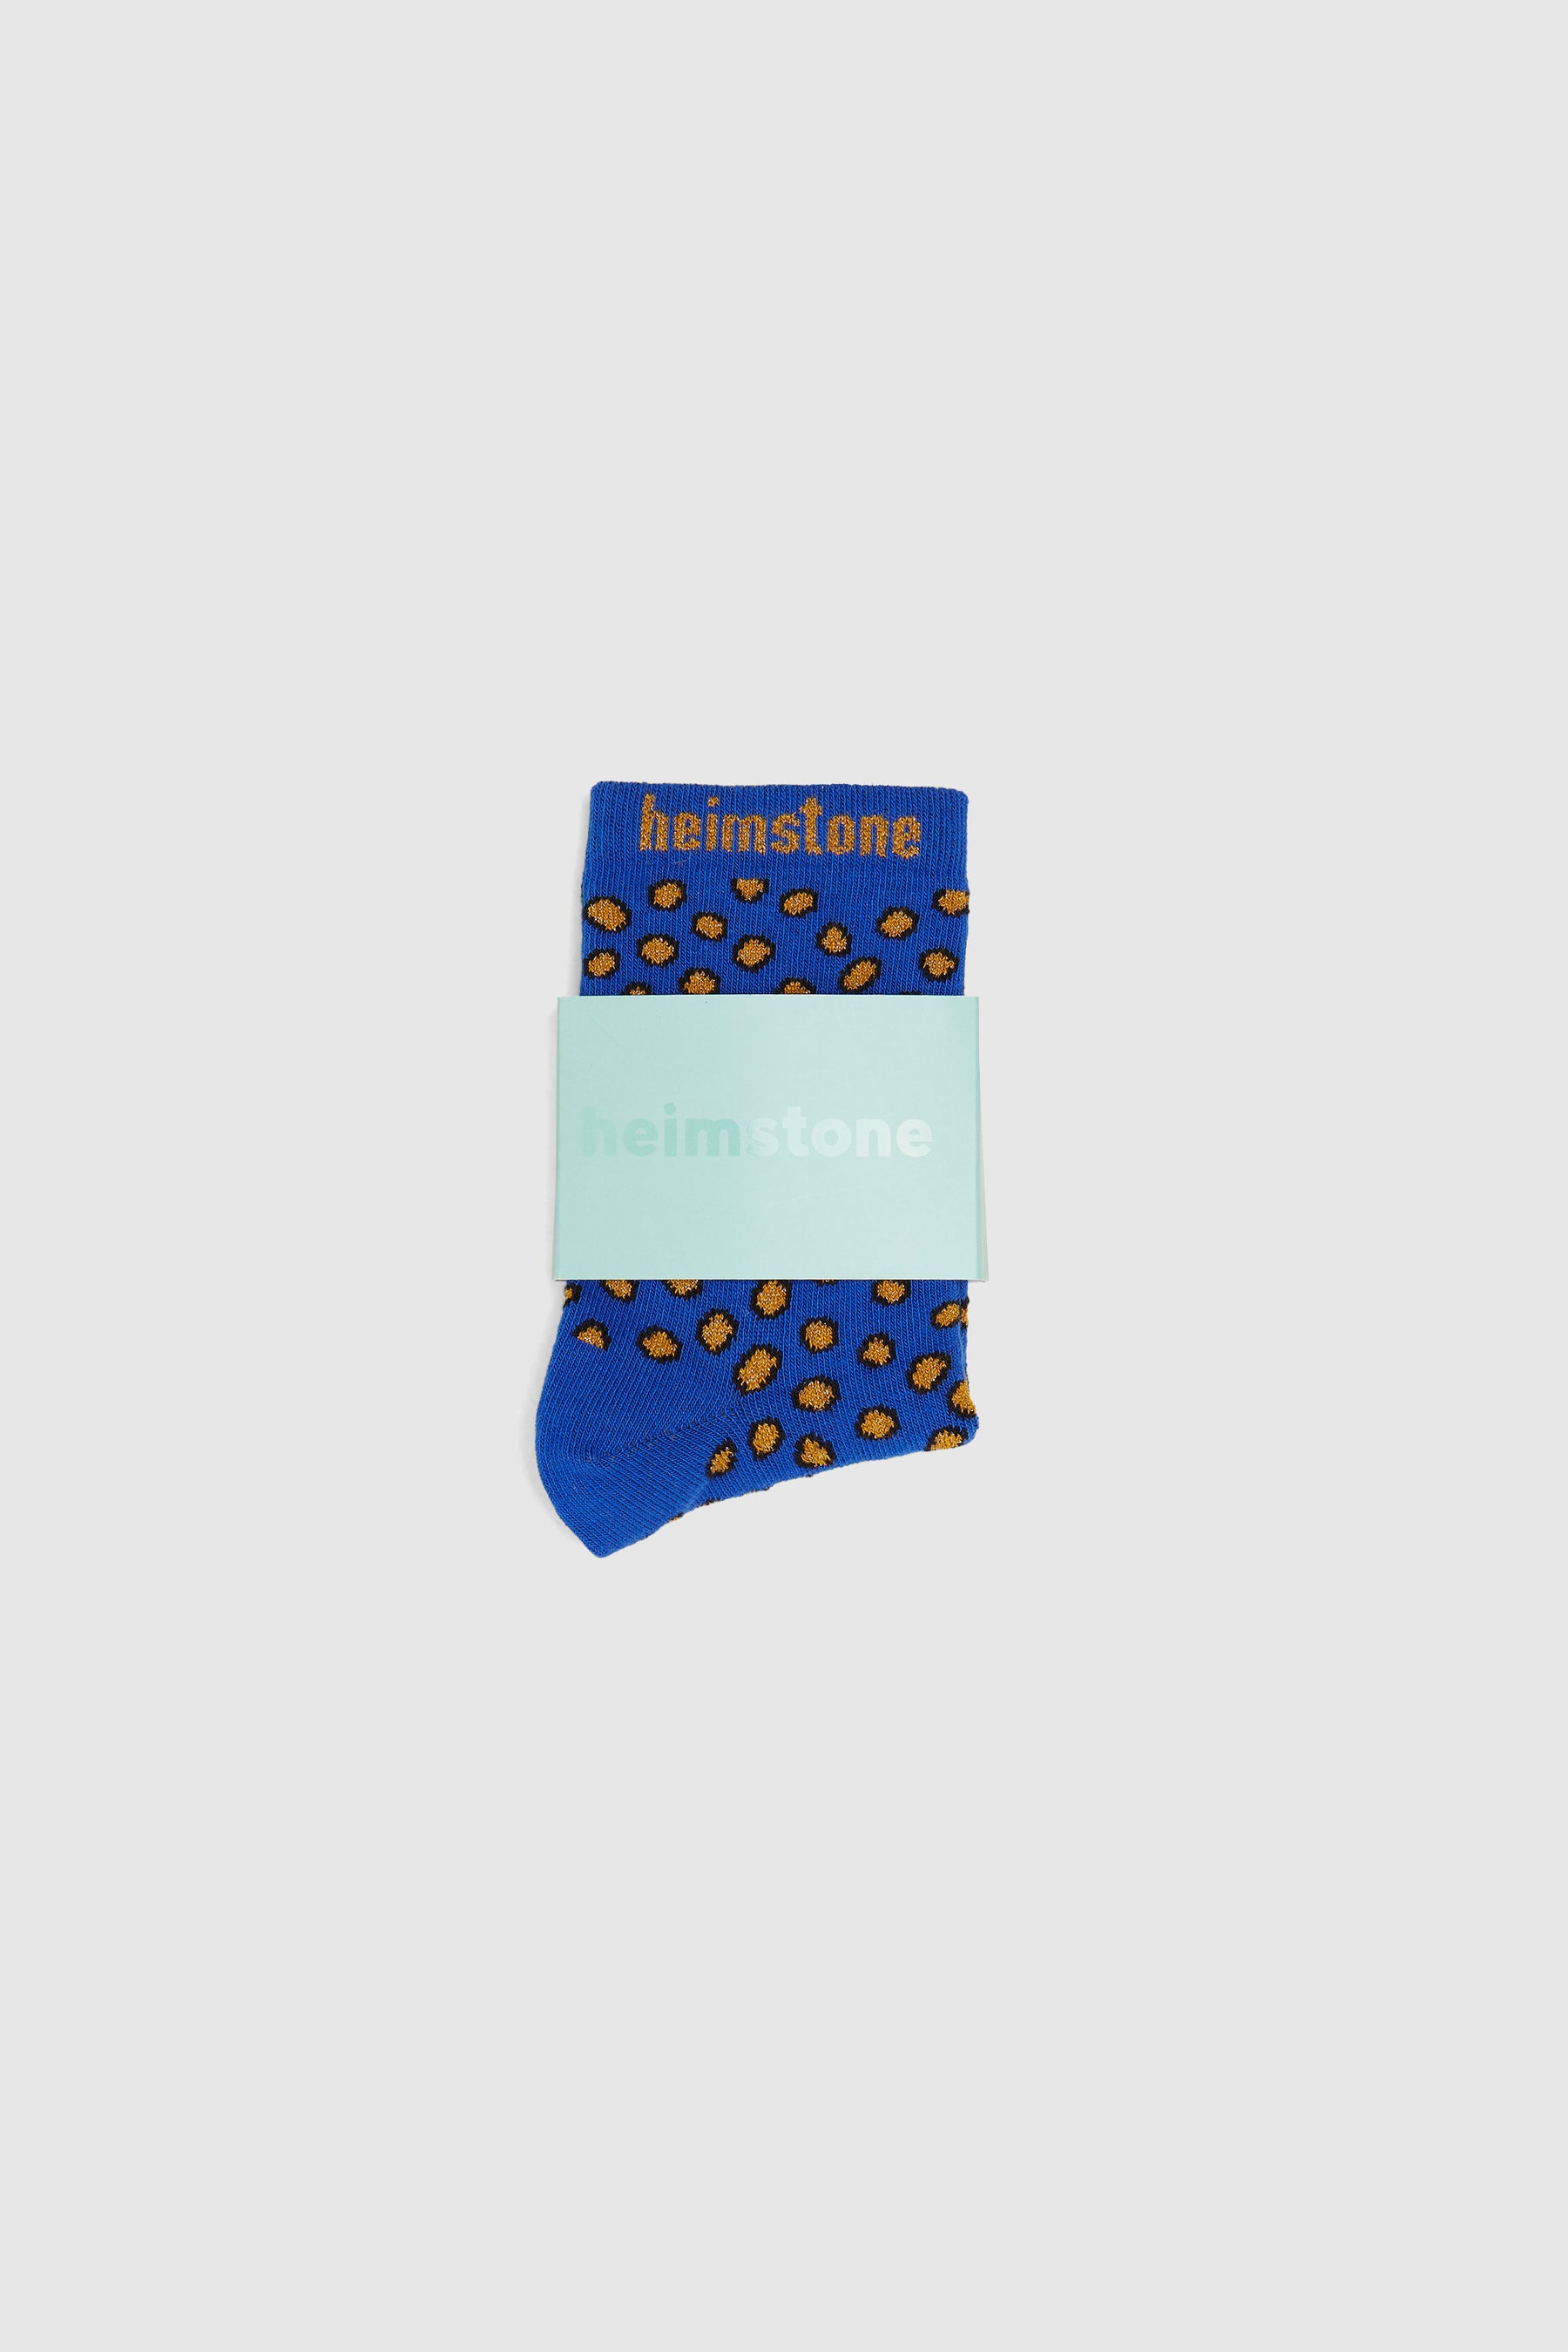 Ankle socks in navy blue Messy Dots